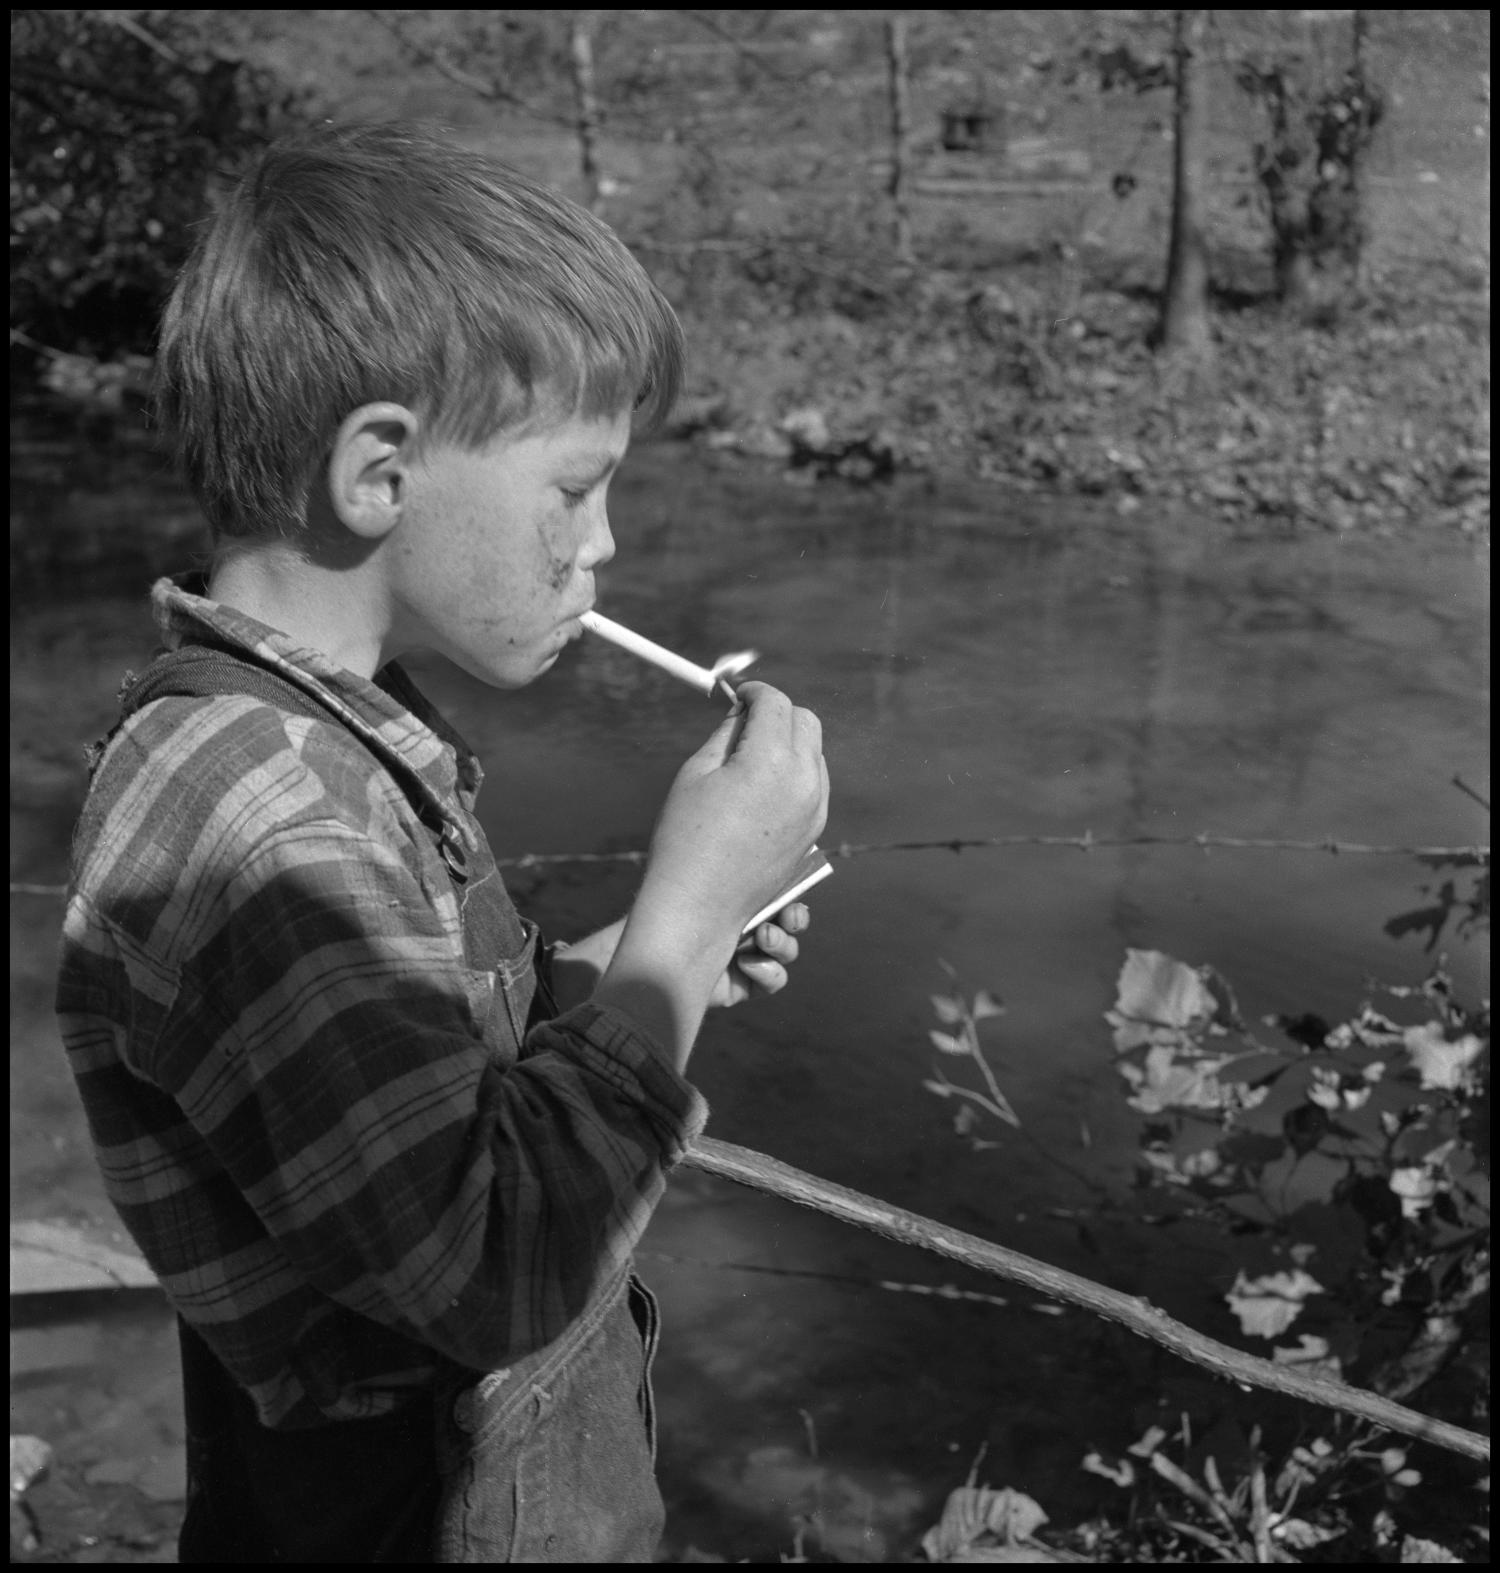 [Smoking boy], Photograph of a young boy lighting a cigarette. In the image, the unidentified boy, wearing overalls, is lighting his cigarette next to a stream separated by barbed wire., 